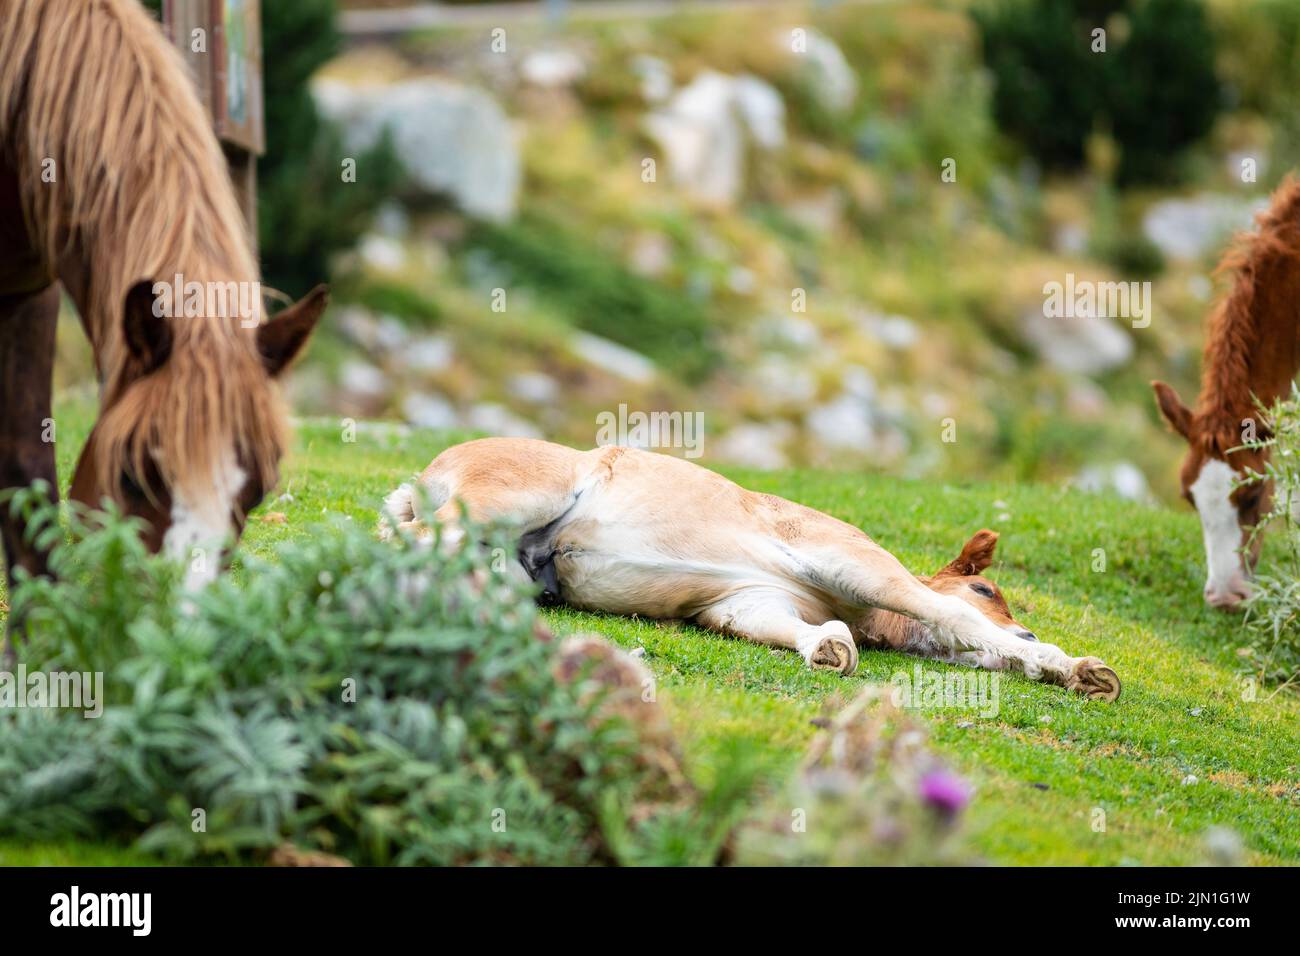 Male foal resting in the grass with his mother by side (equus ferus caballus) Cavall Pirinenc Català (Catalan Pyrenean Horse) Stock Photo